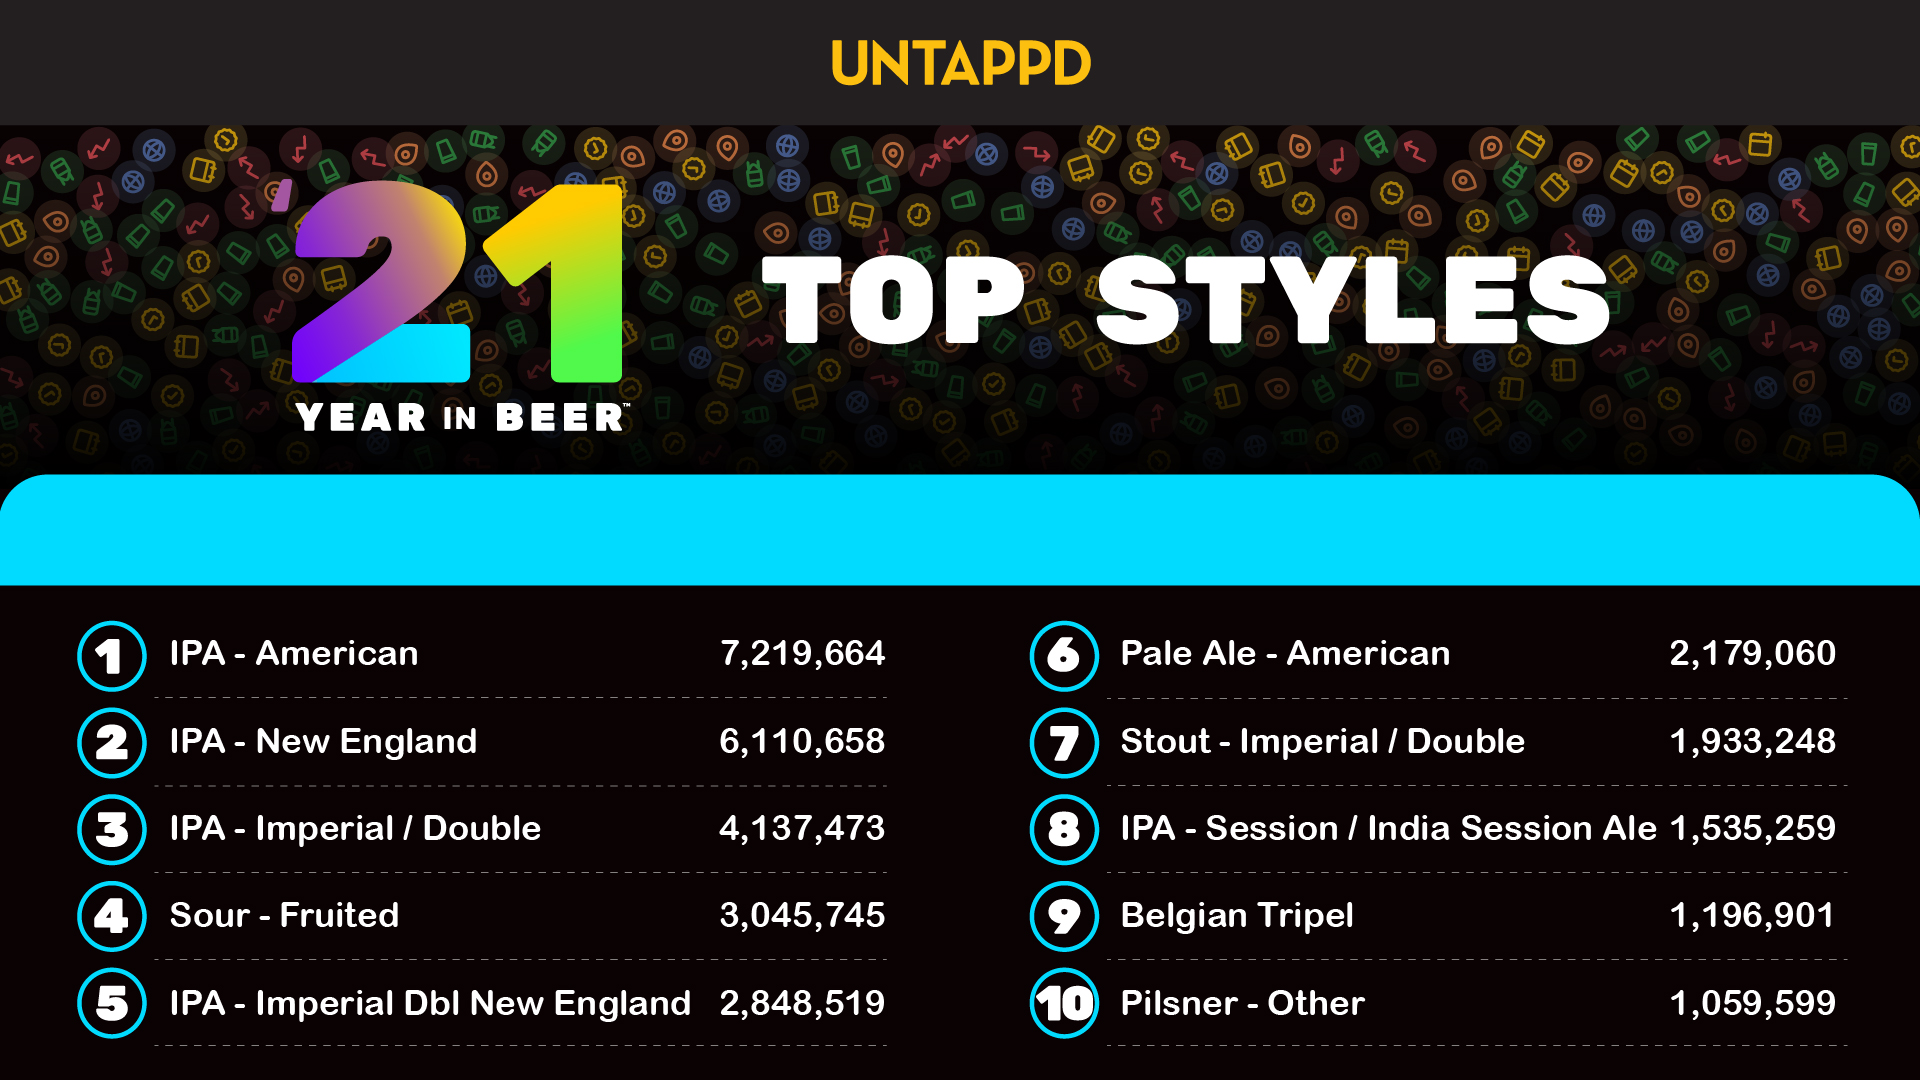 A screenshot of Untappd's Year in Beer review featuing the top ten styles, including four IPAs in the top five spots